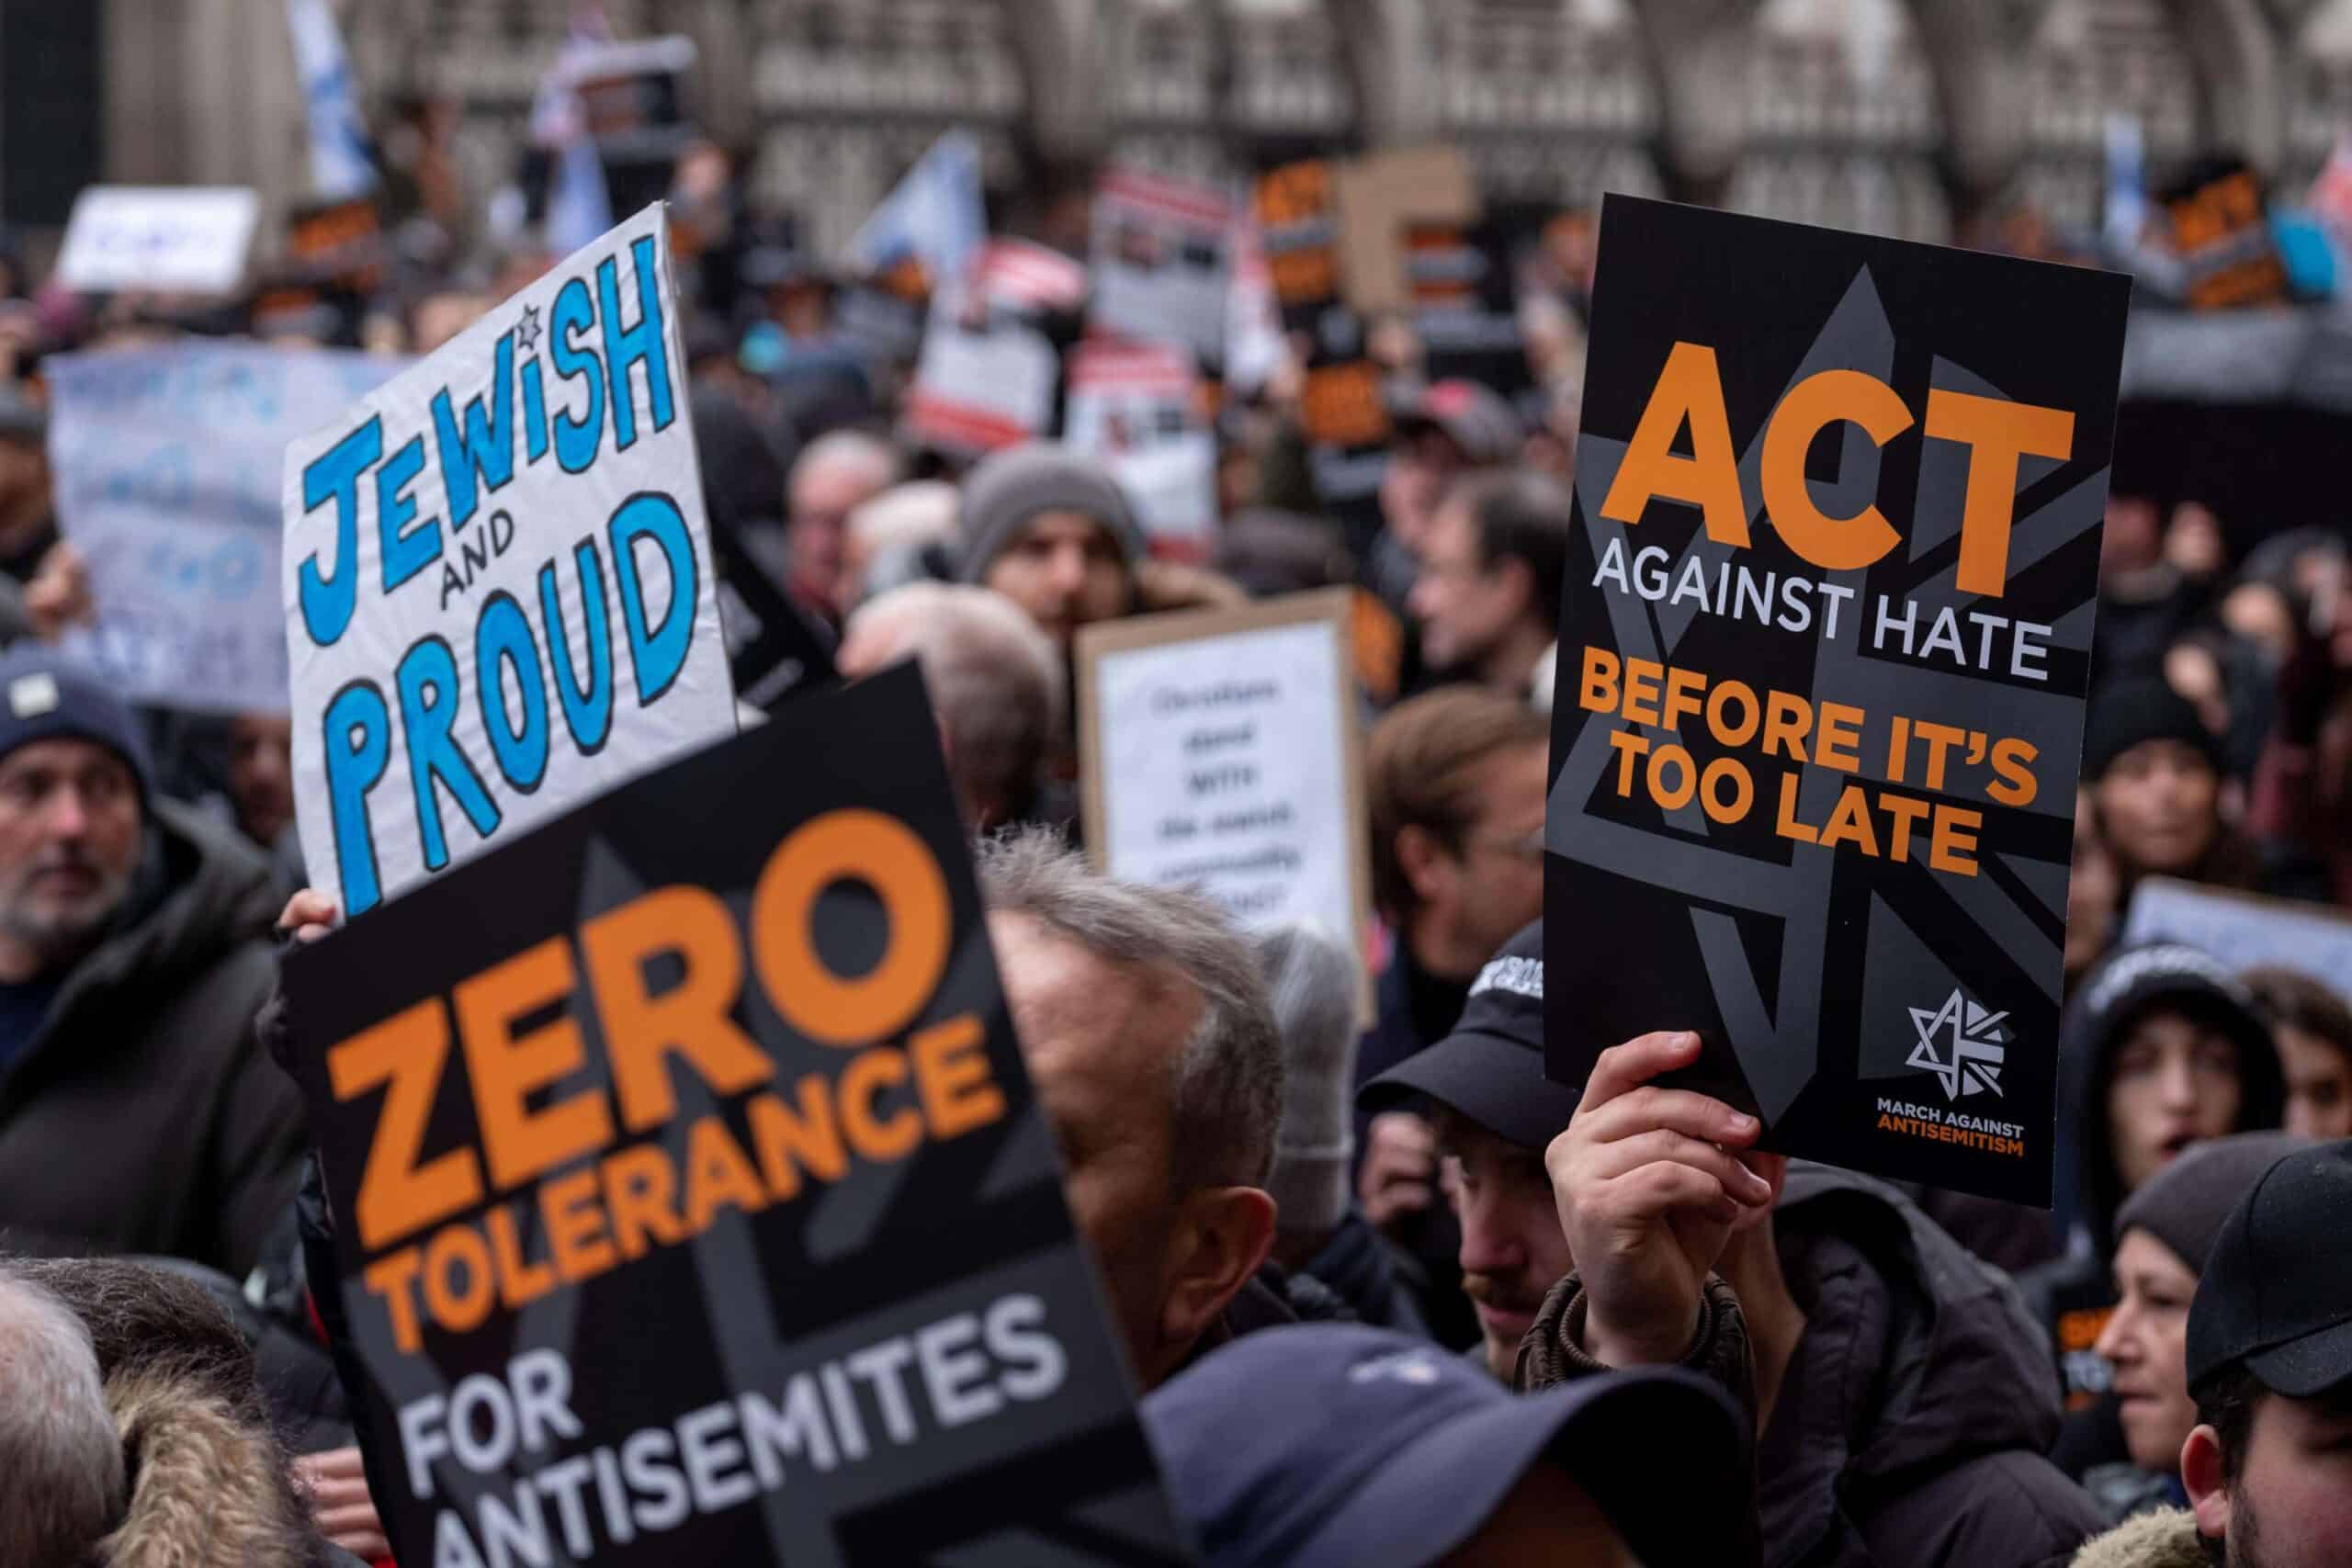 ‘Explosion in hatred’ as all-time high antisemitism recorded by Jewish charity